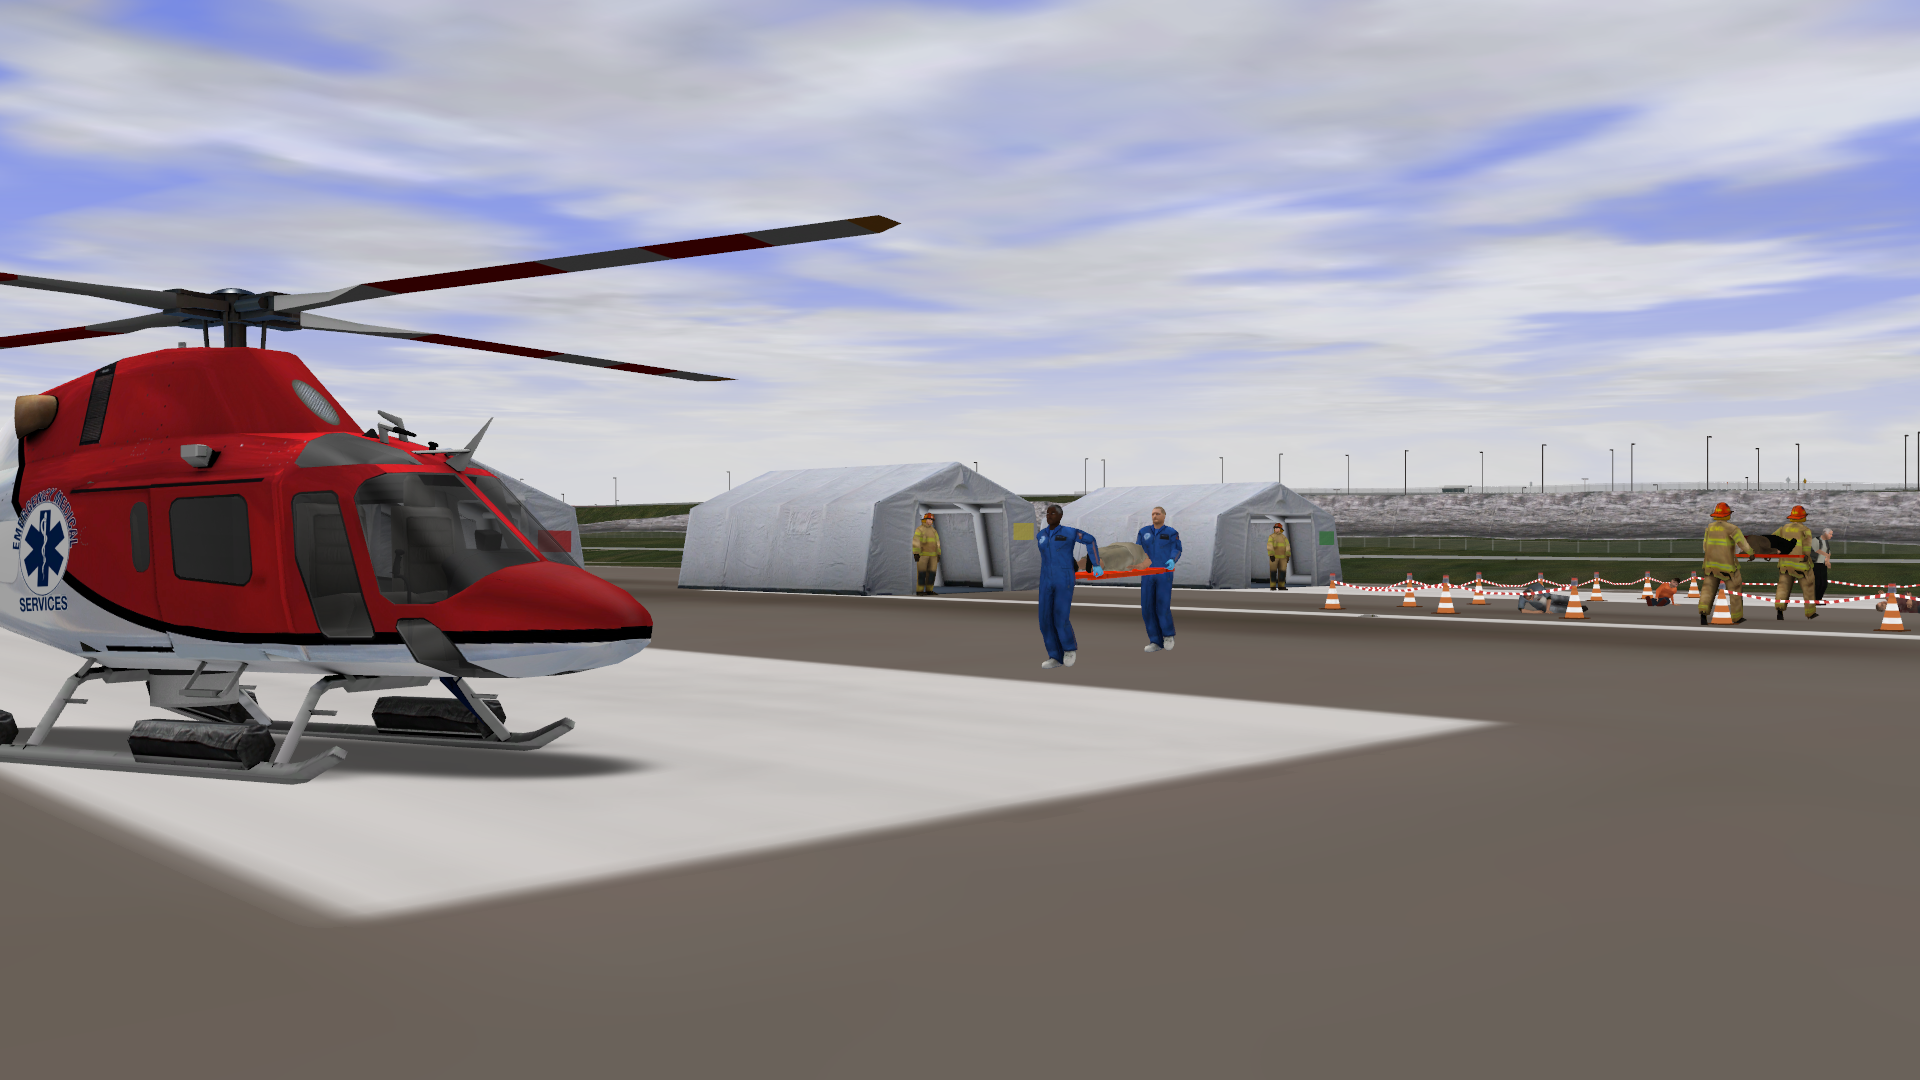 Medivac helicopter ready to transport a critical casualty to the hospital from a simulated mass casualty incident.